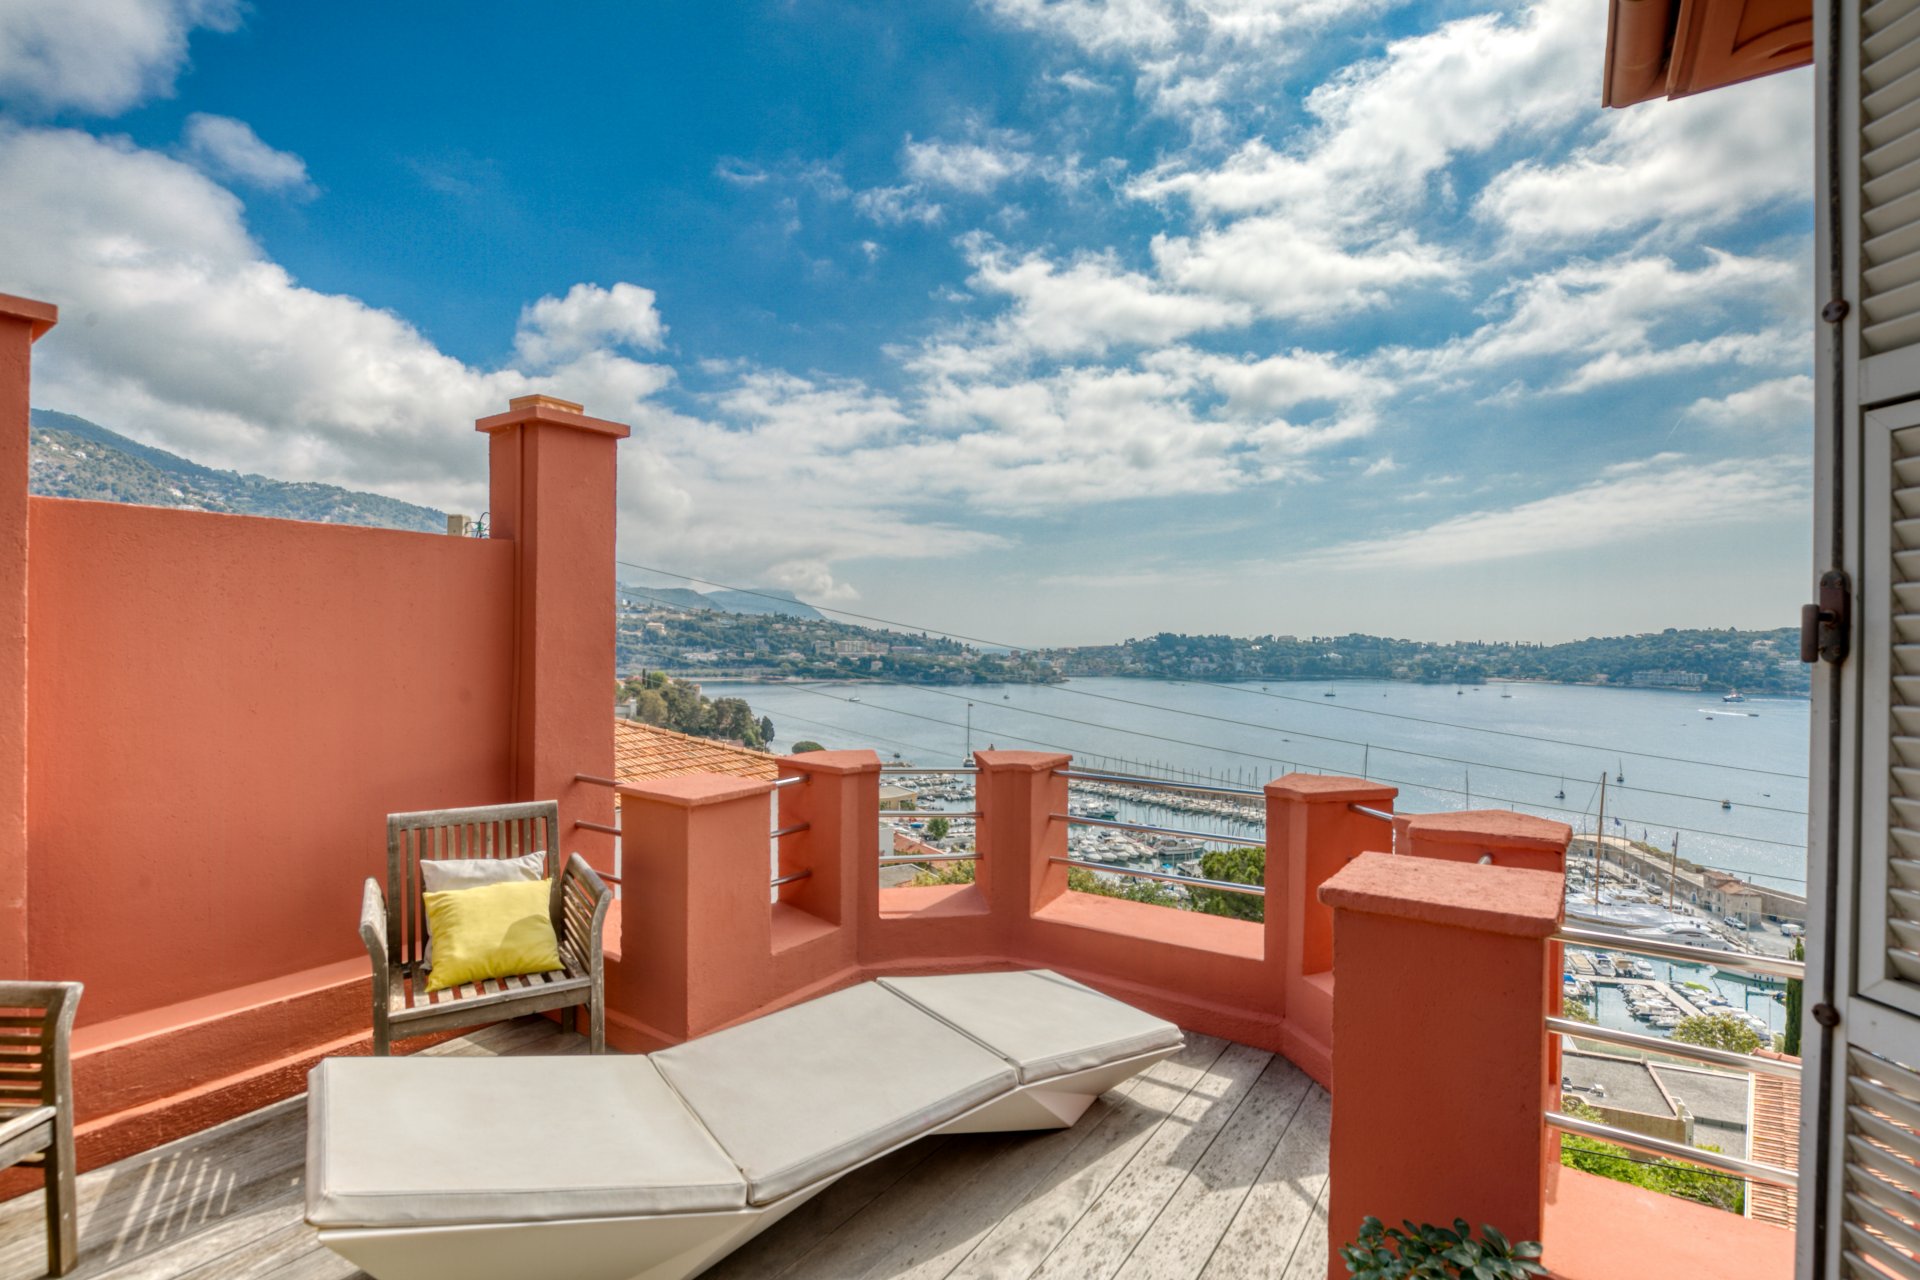 Spectacular view on the bay of Villefranche